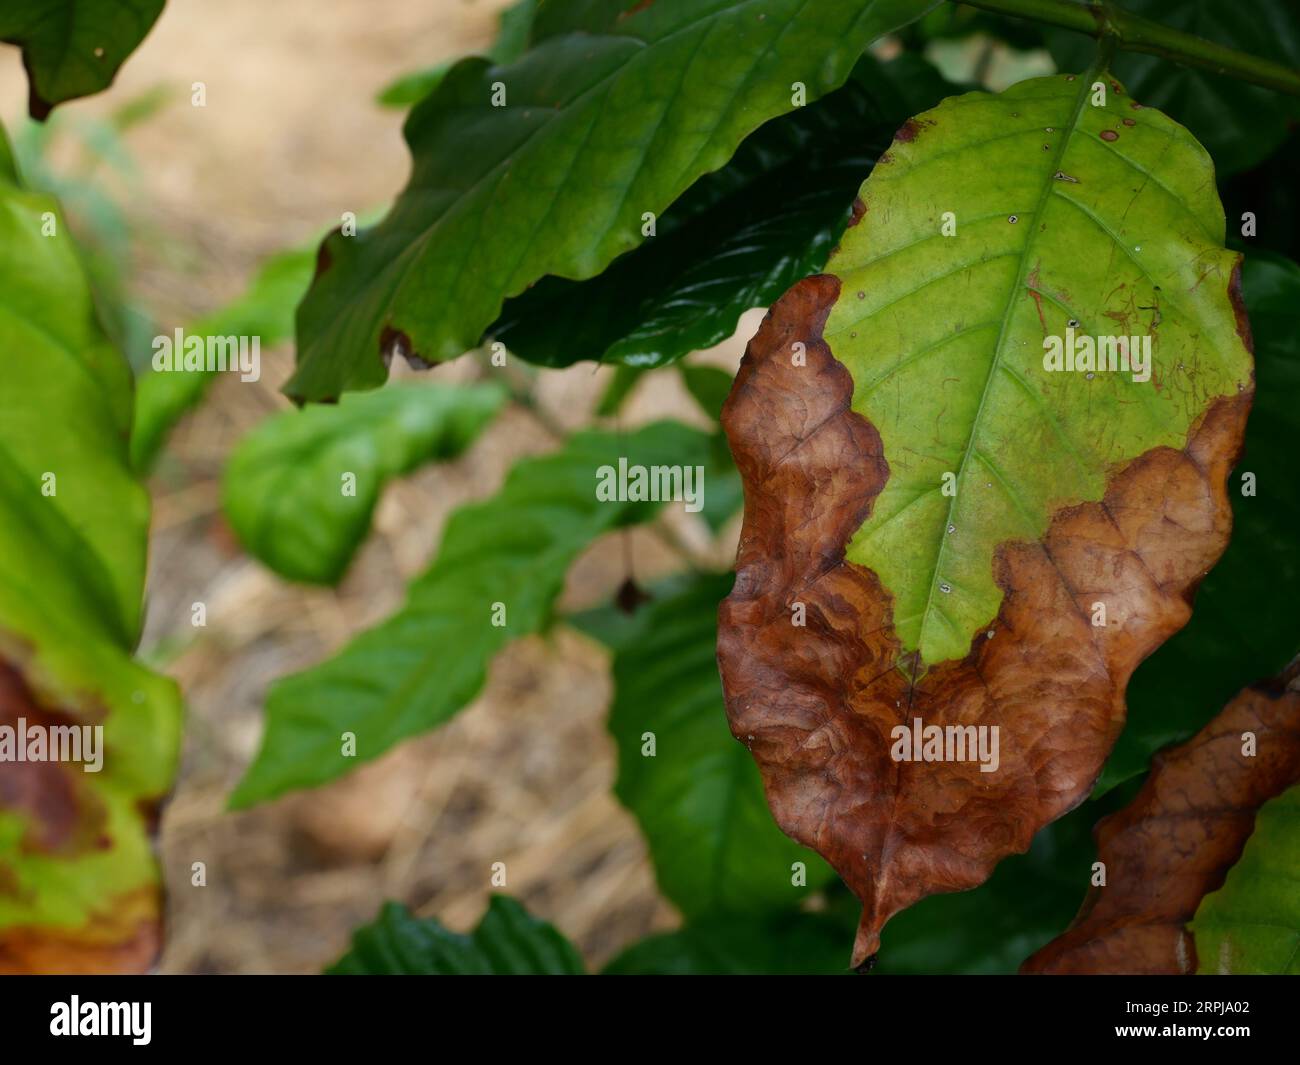 Brown spotted and yellow damage by anthracnose on the green leaf of Robusta coffee plant tree, Plant diseases that damage agriculture Stock Photo